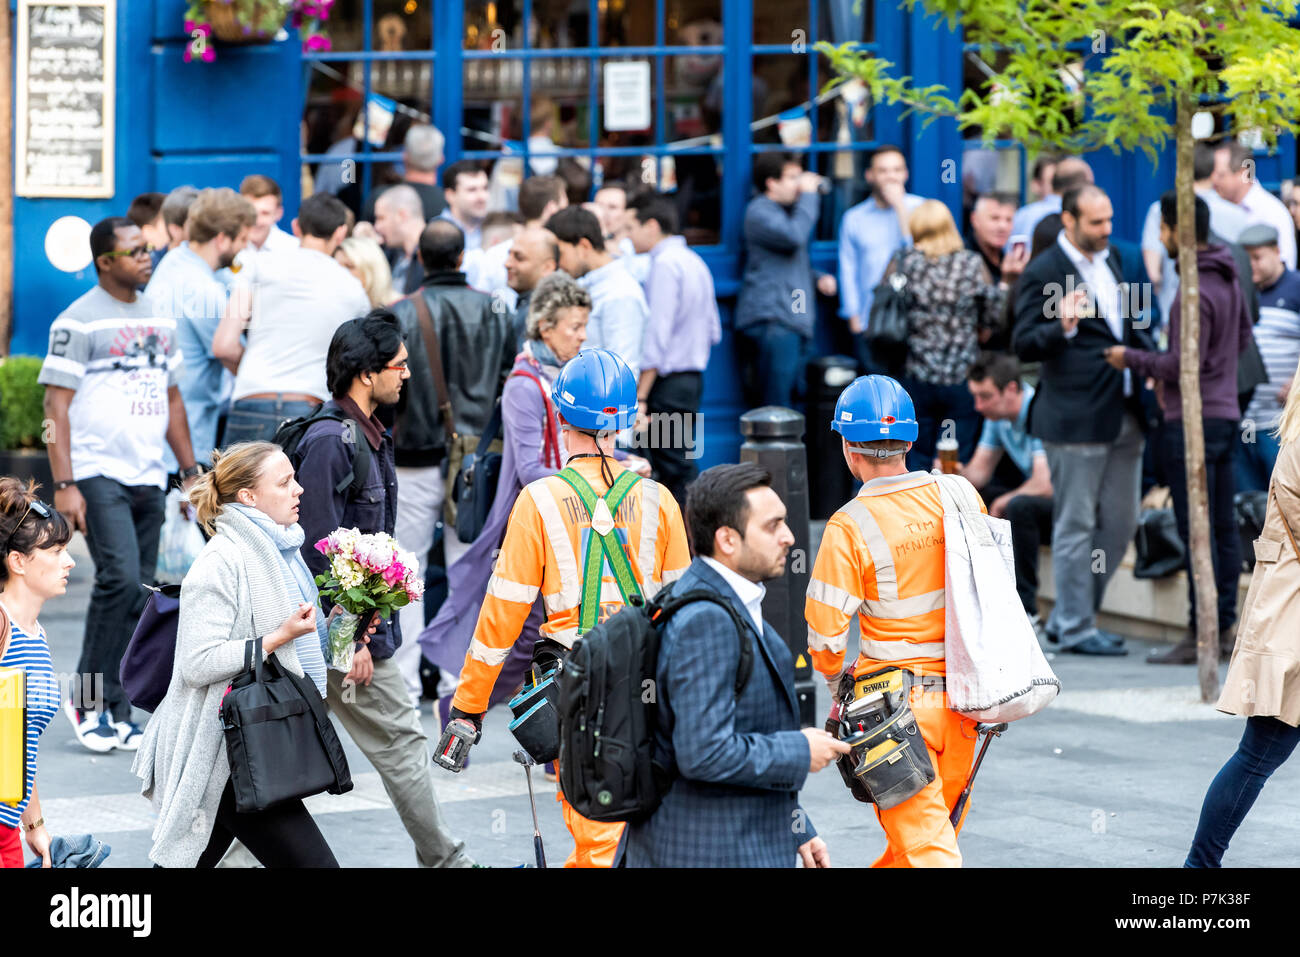 London, UK - June 22, 2018: Crowd of many people two construction workers pedestrians walking by London Bridge street road in center of downtown city, Stock Photo